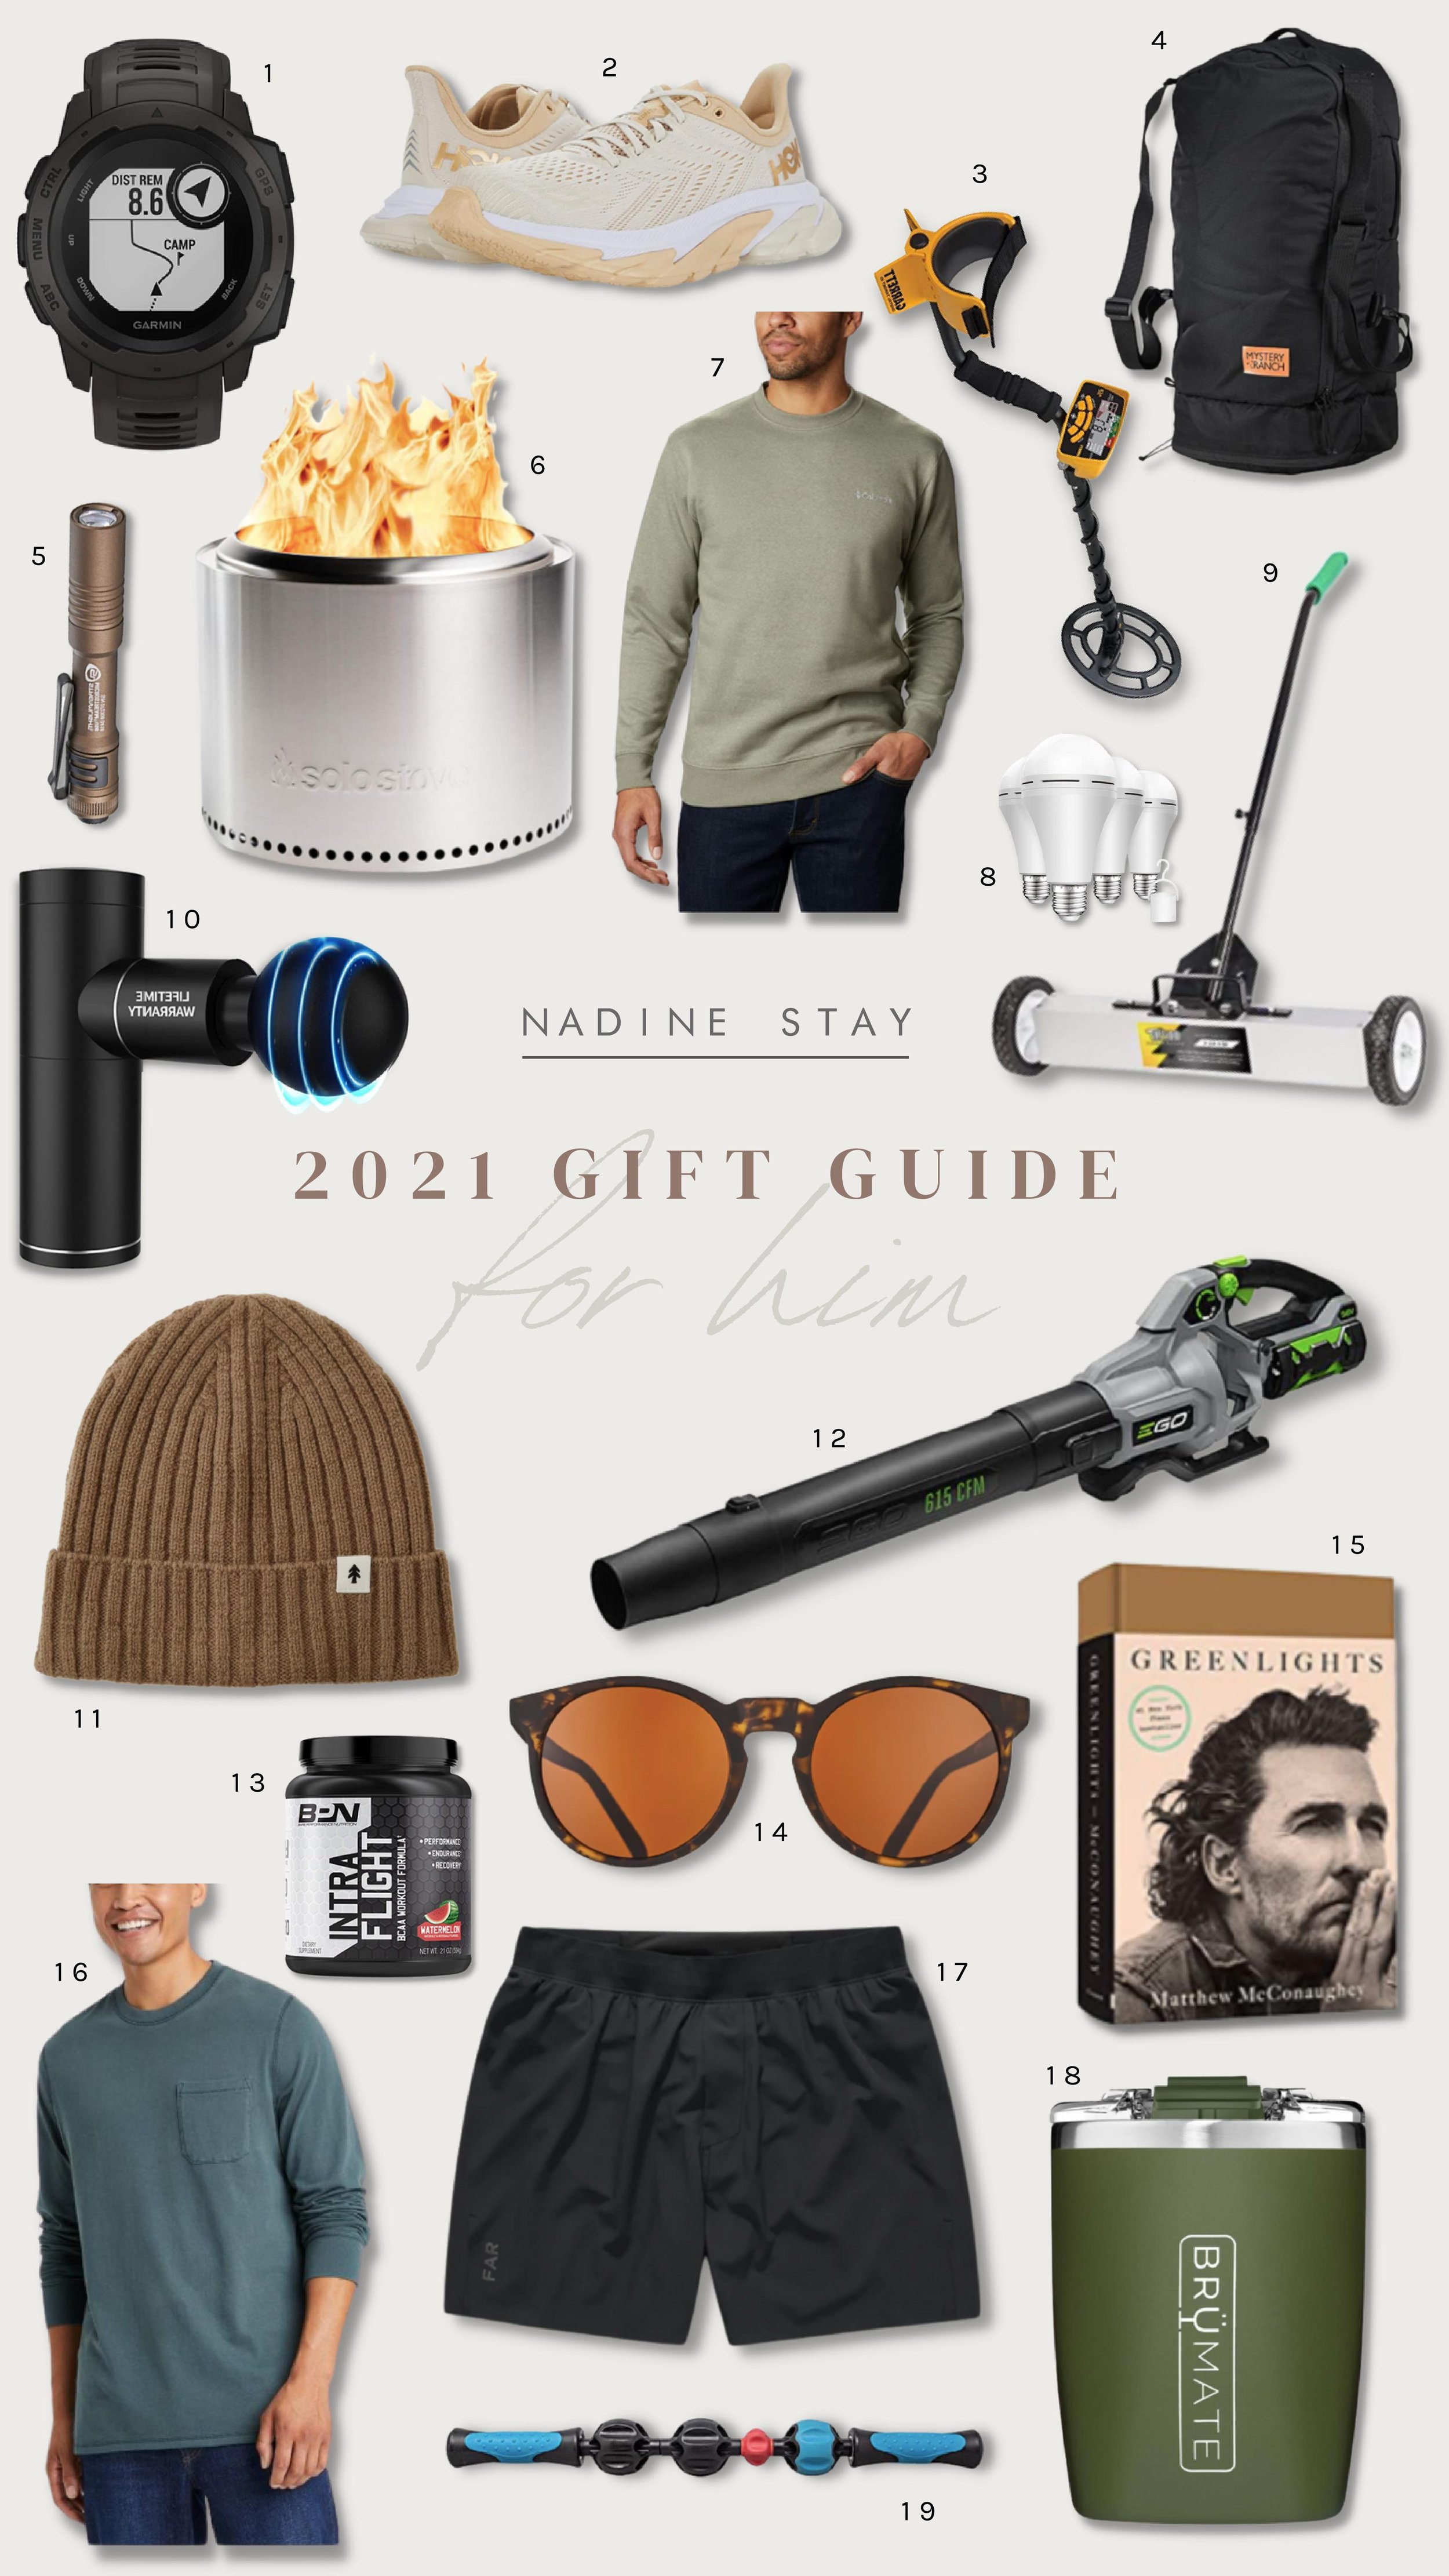 2021 Holiday Gift Guide For Him - 19 gifts he'll love. 19 gift ideas for your dad, boyfriend, brother, or son. Clothing, tools, gear, and workout gear you can gift him this Christmas. | Nadine Stay